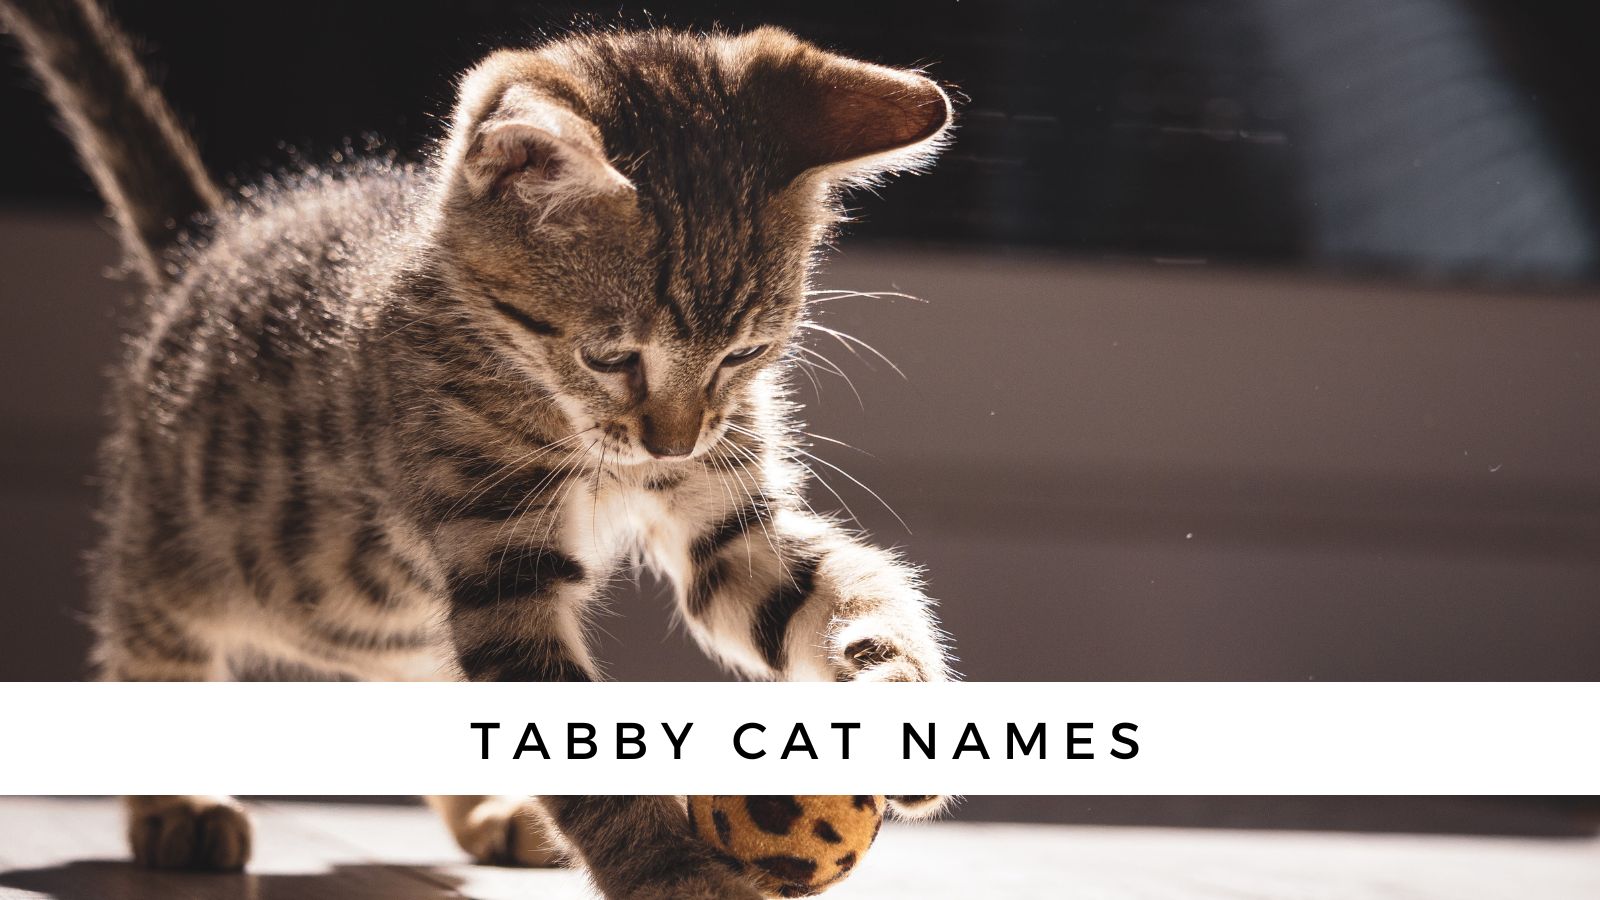 Tabby Cat Names: The Ultimate Guide for Your Striped Cat